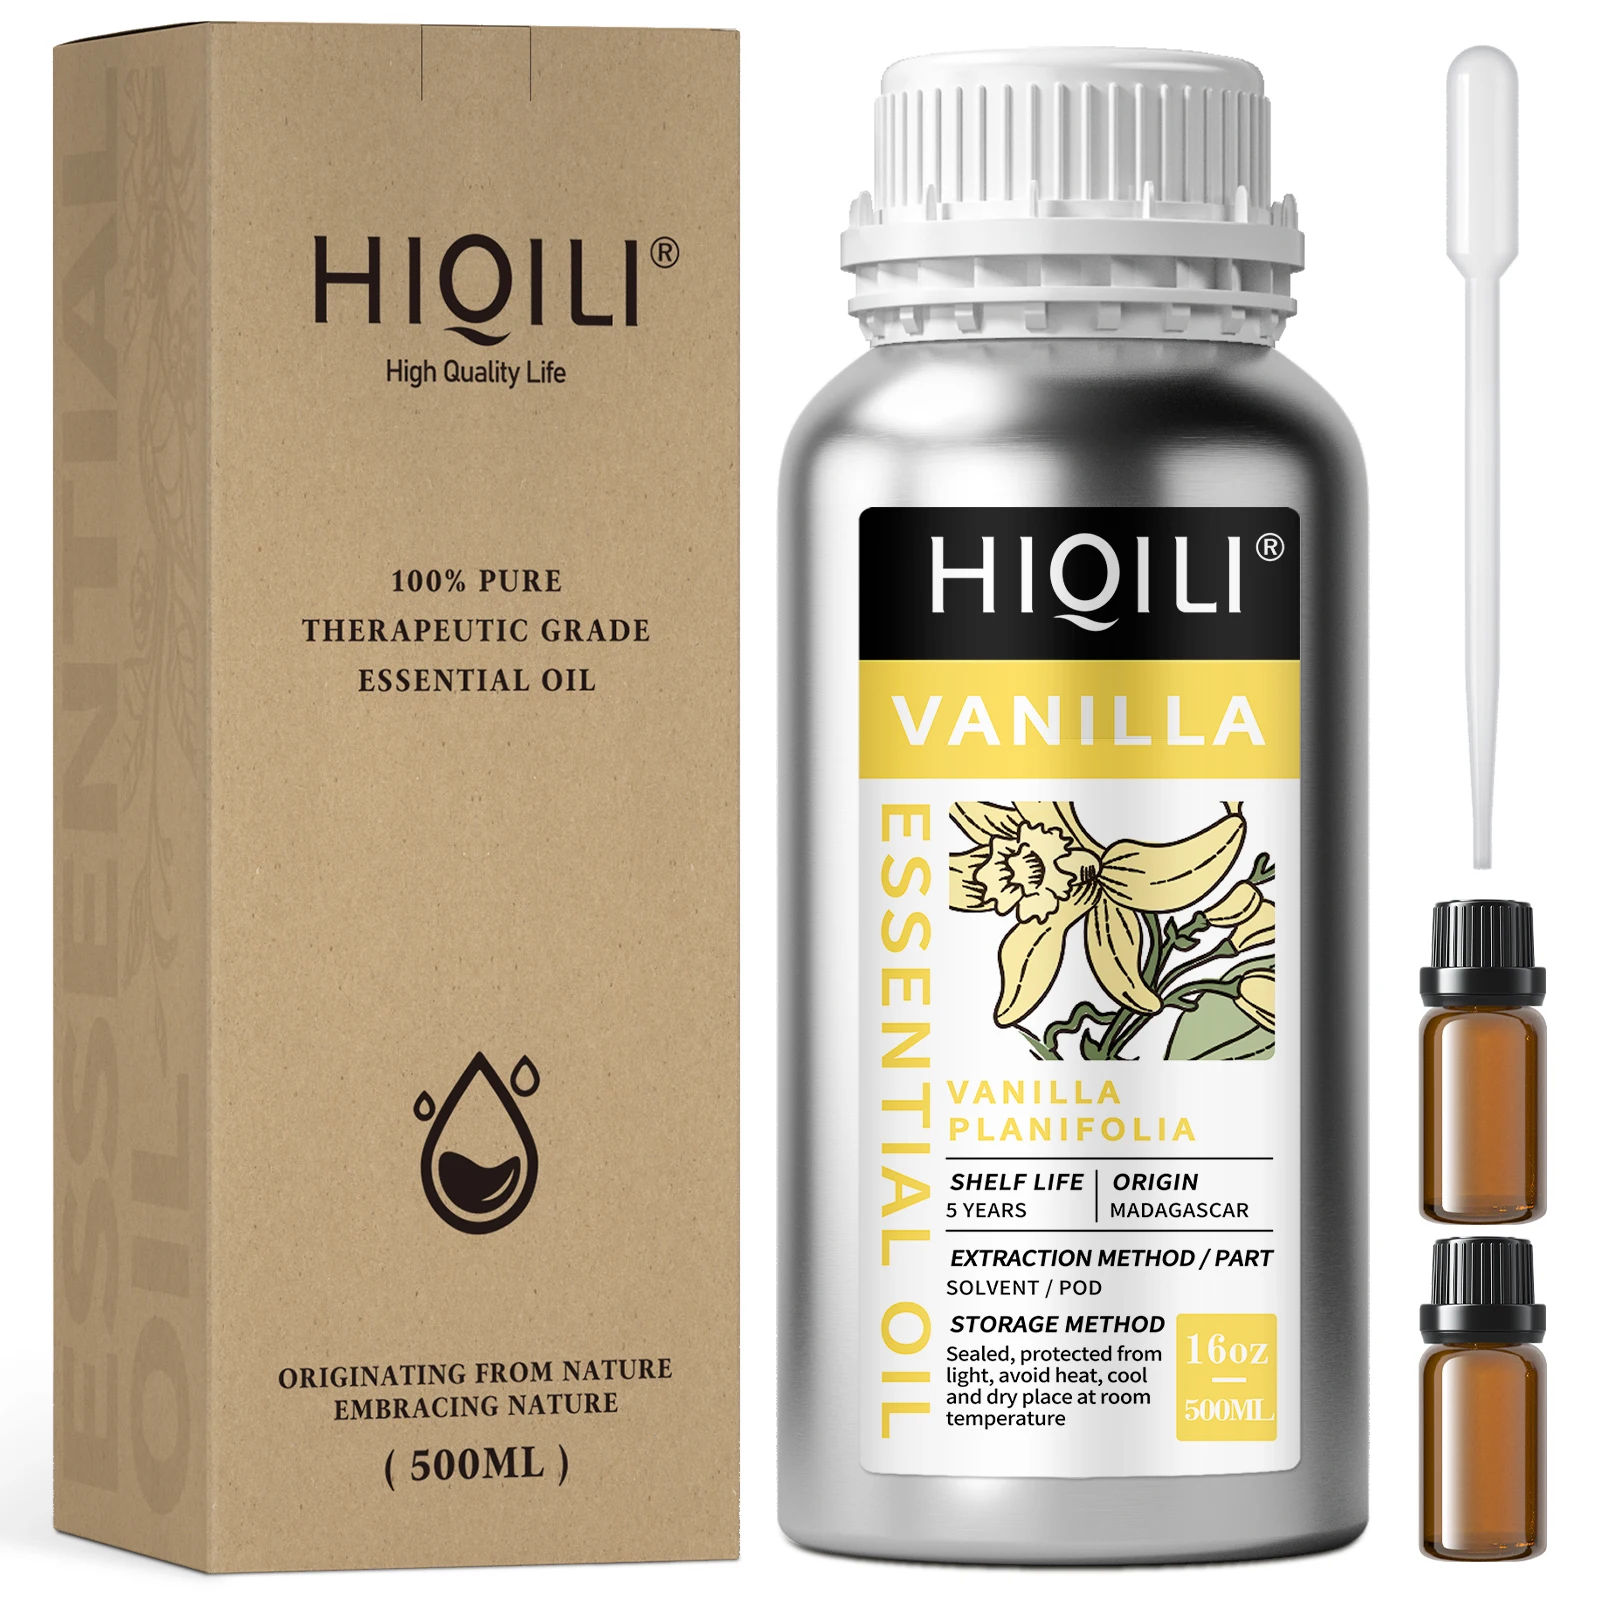 hiqili-500ml-vanilla-essential-oils100-pure-nature-for-aromatherapy-used-for-diffuser-humidifier-massage-perfume-diy